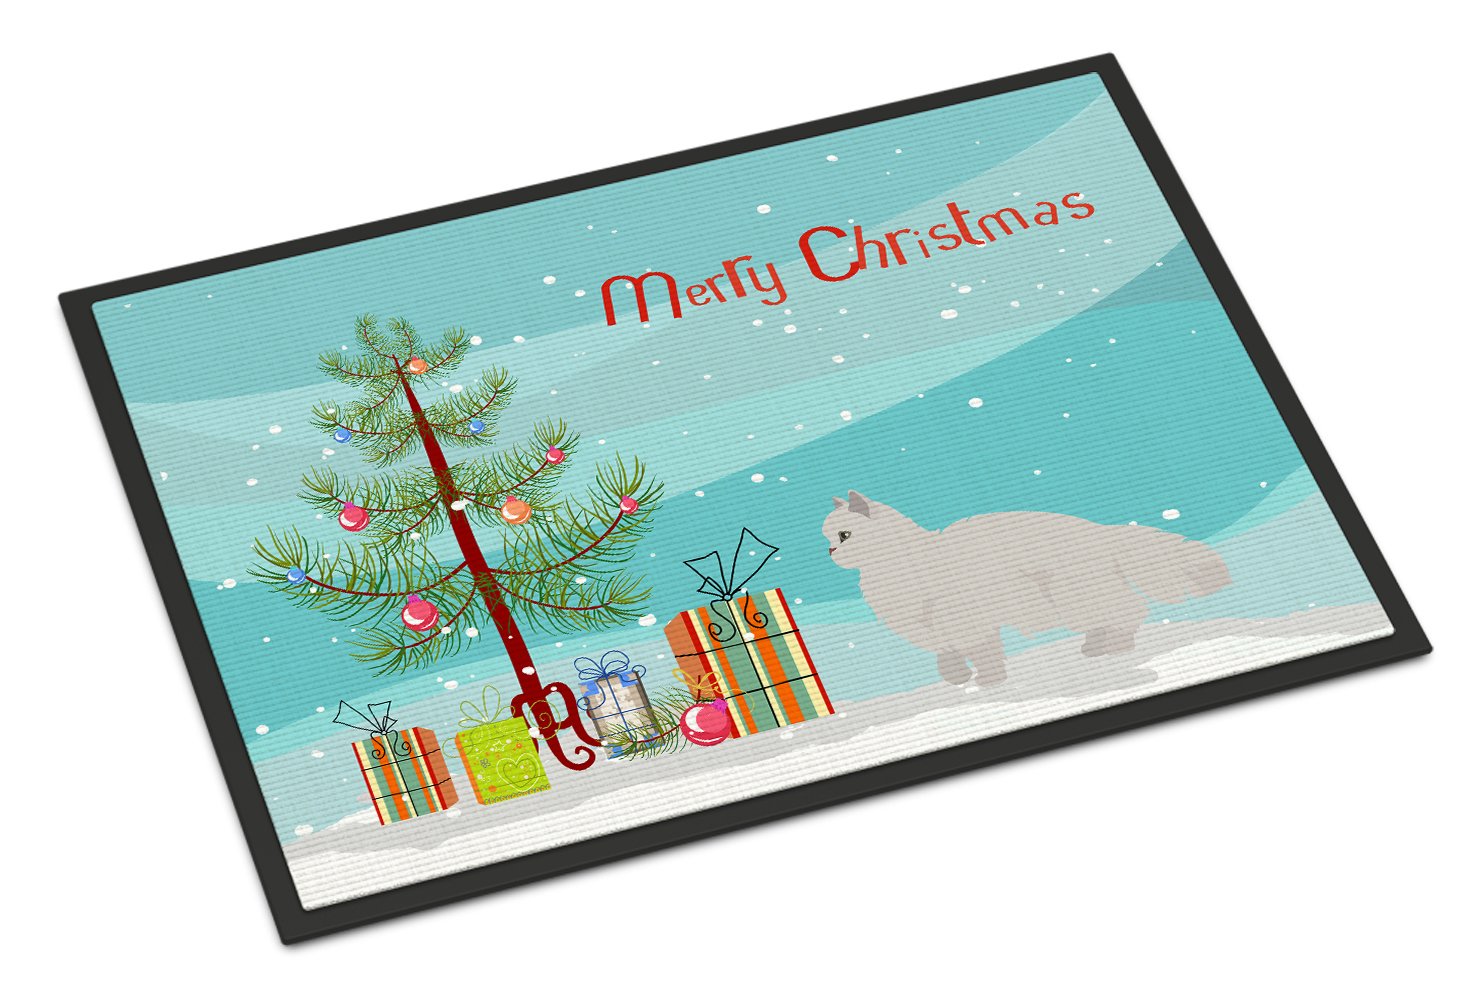 White Persian Traditional Cat Merry Christmas Indoor or Outdoor Mat 24x36 CK4681JMAT by Caroline's Treasures